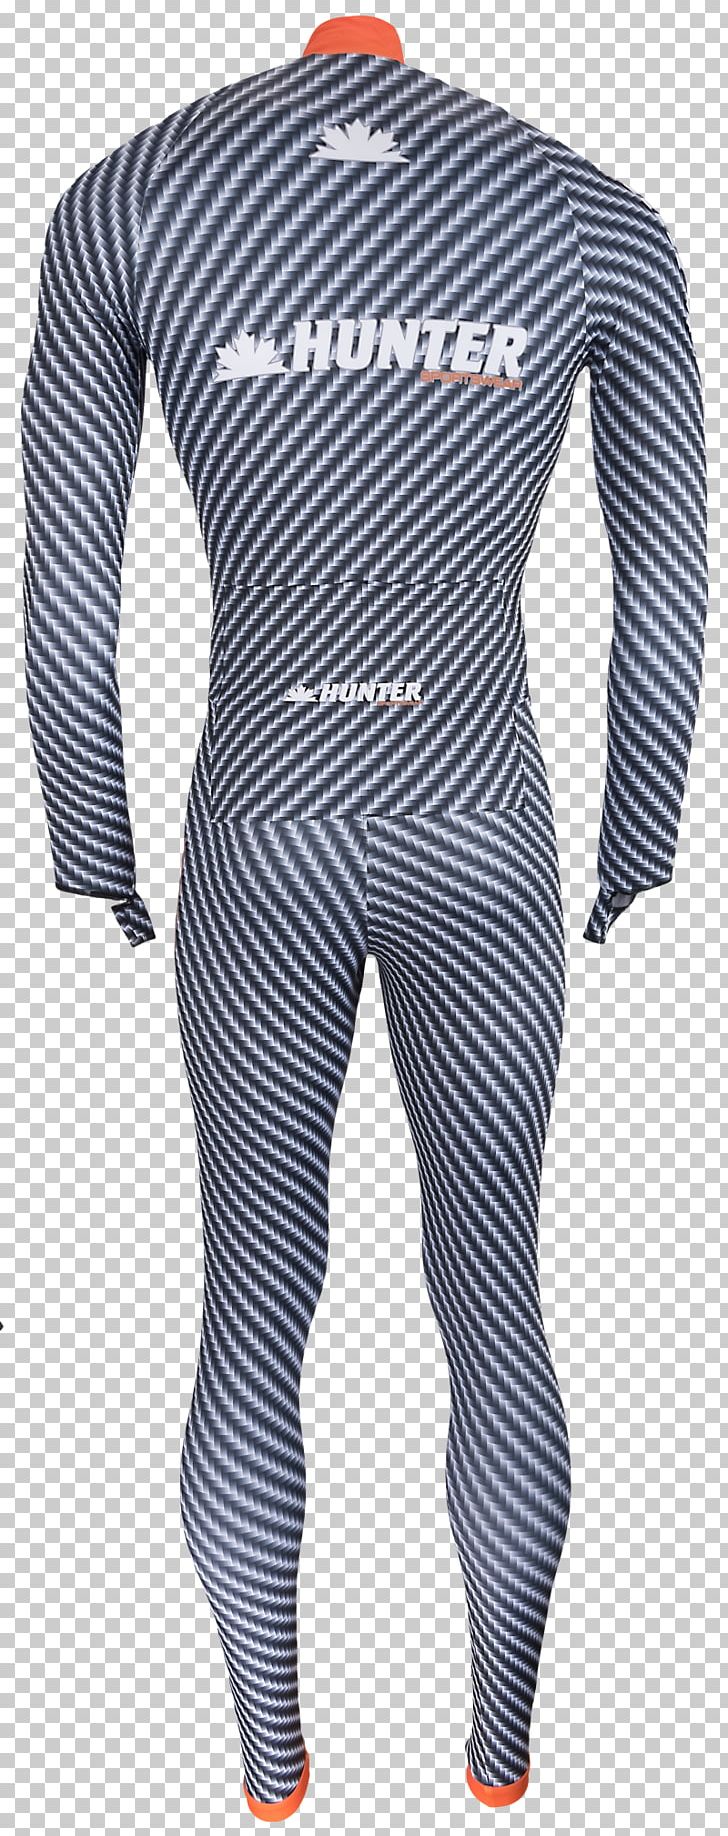 Wetsuit Spandex Slim-fit Pants Zipper Textile PNG, Clipart, Anatomy, Carbon, Collection, Elasticity, Employee Stock Option Free PNG Download